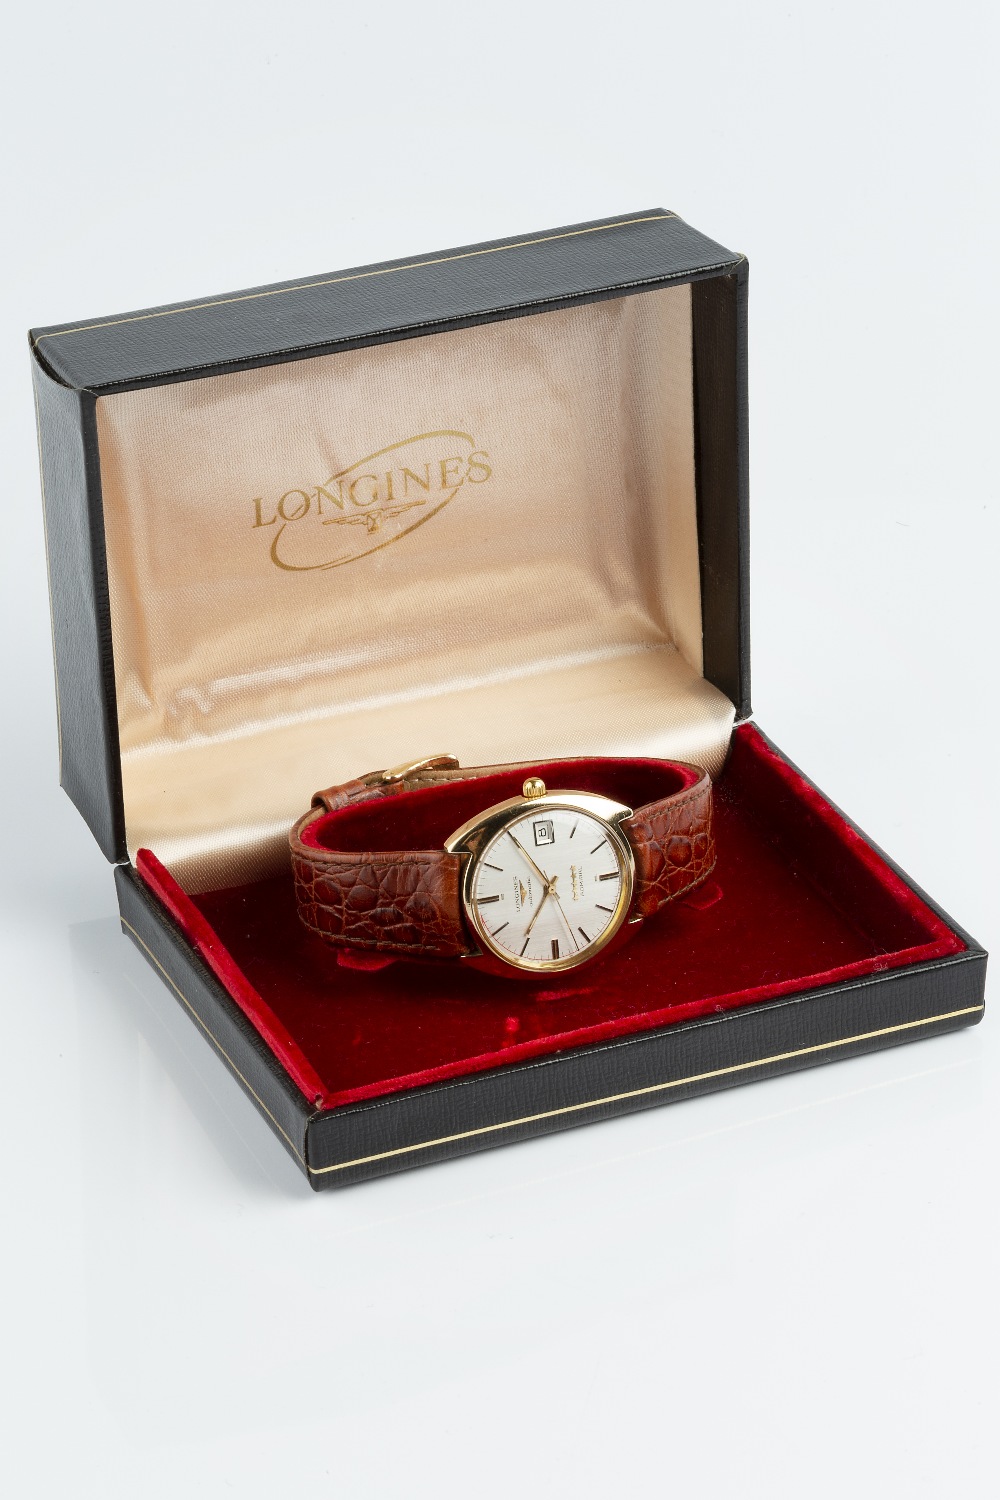 A GENTLEMAN'S 'ADMIRAL' AUTOMATIC WRISTWATCH BY LONGINES, the circular signed silvered dial with